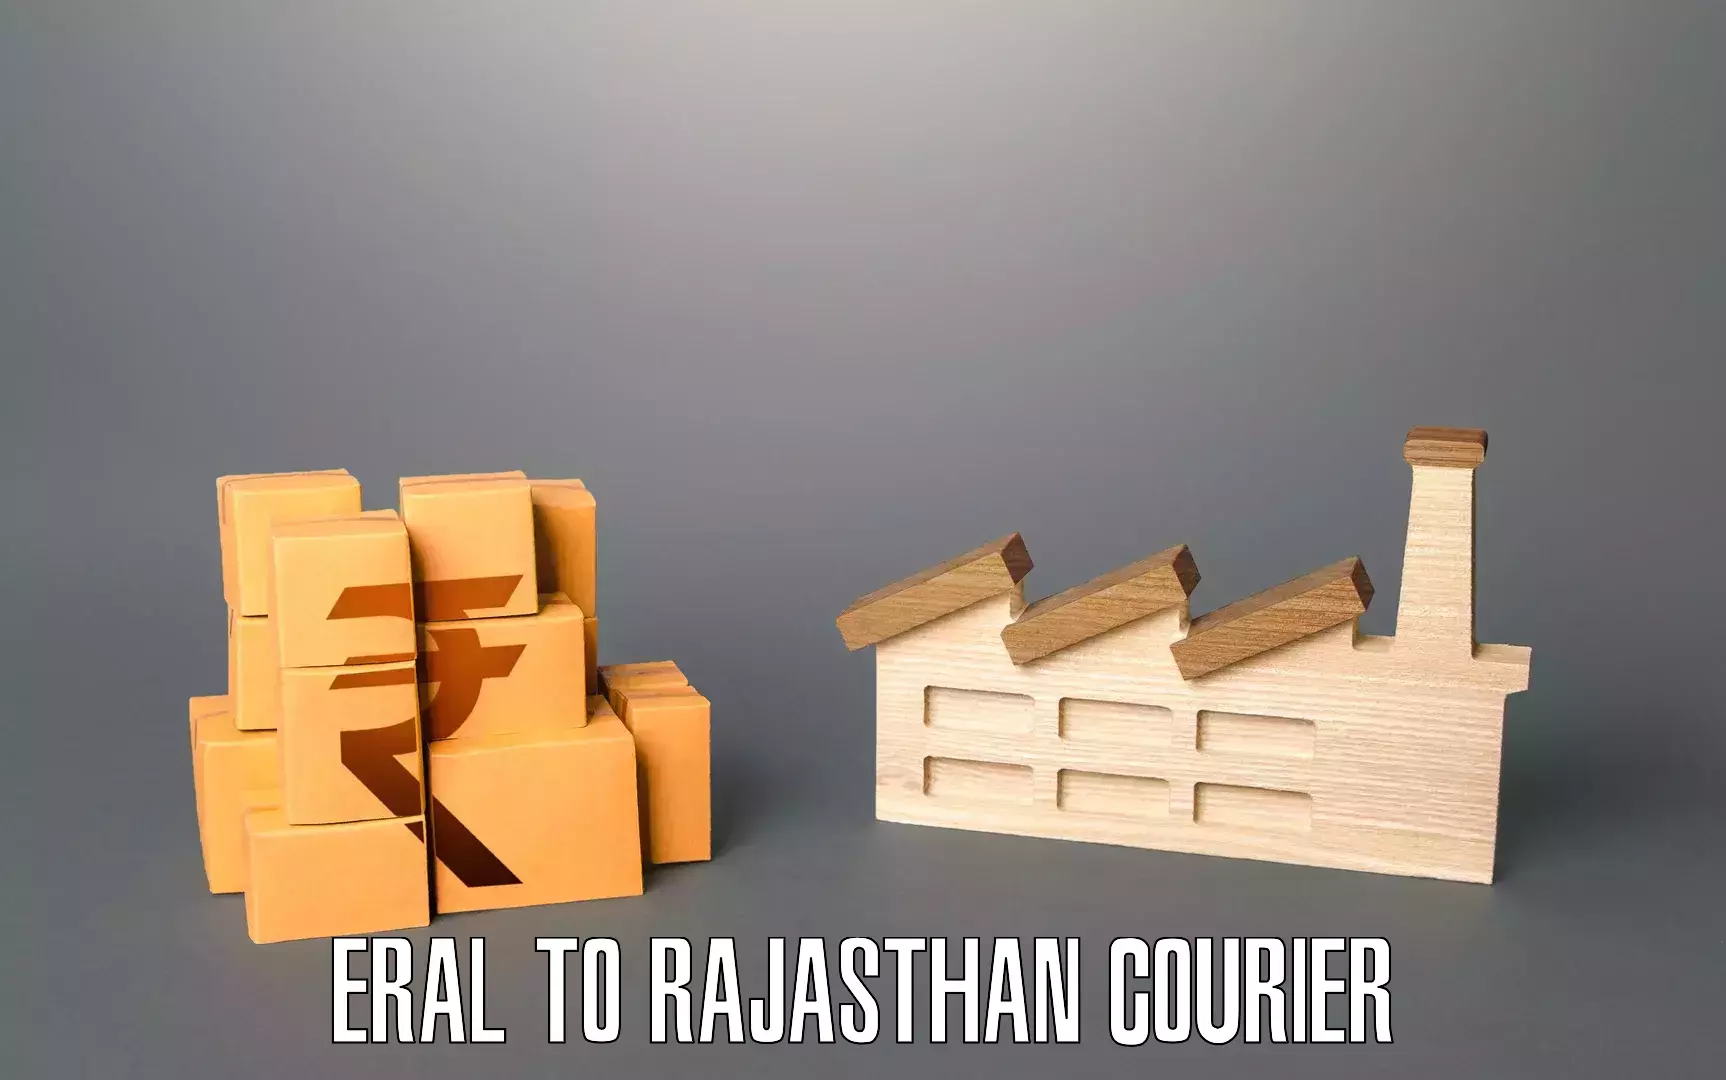 Household transport experts in Eral to Rajasthan